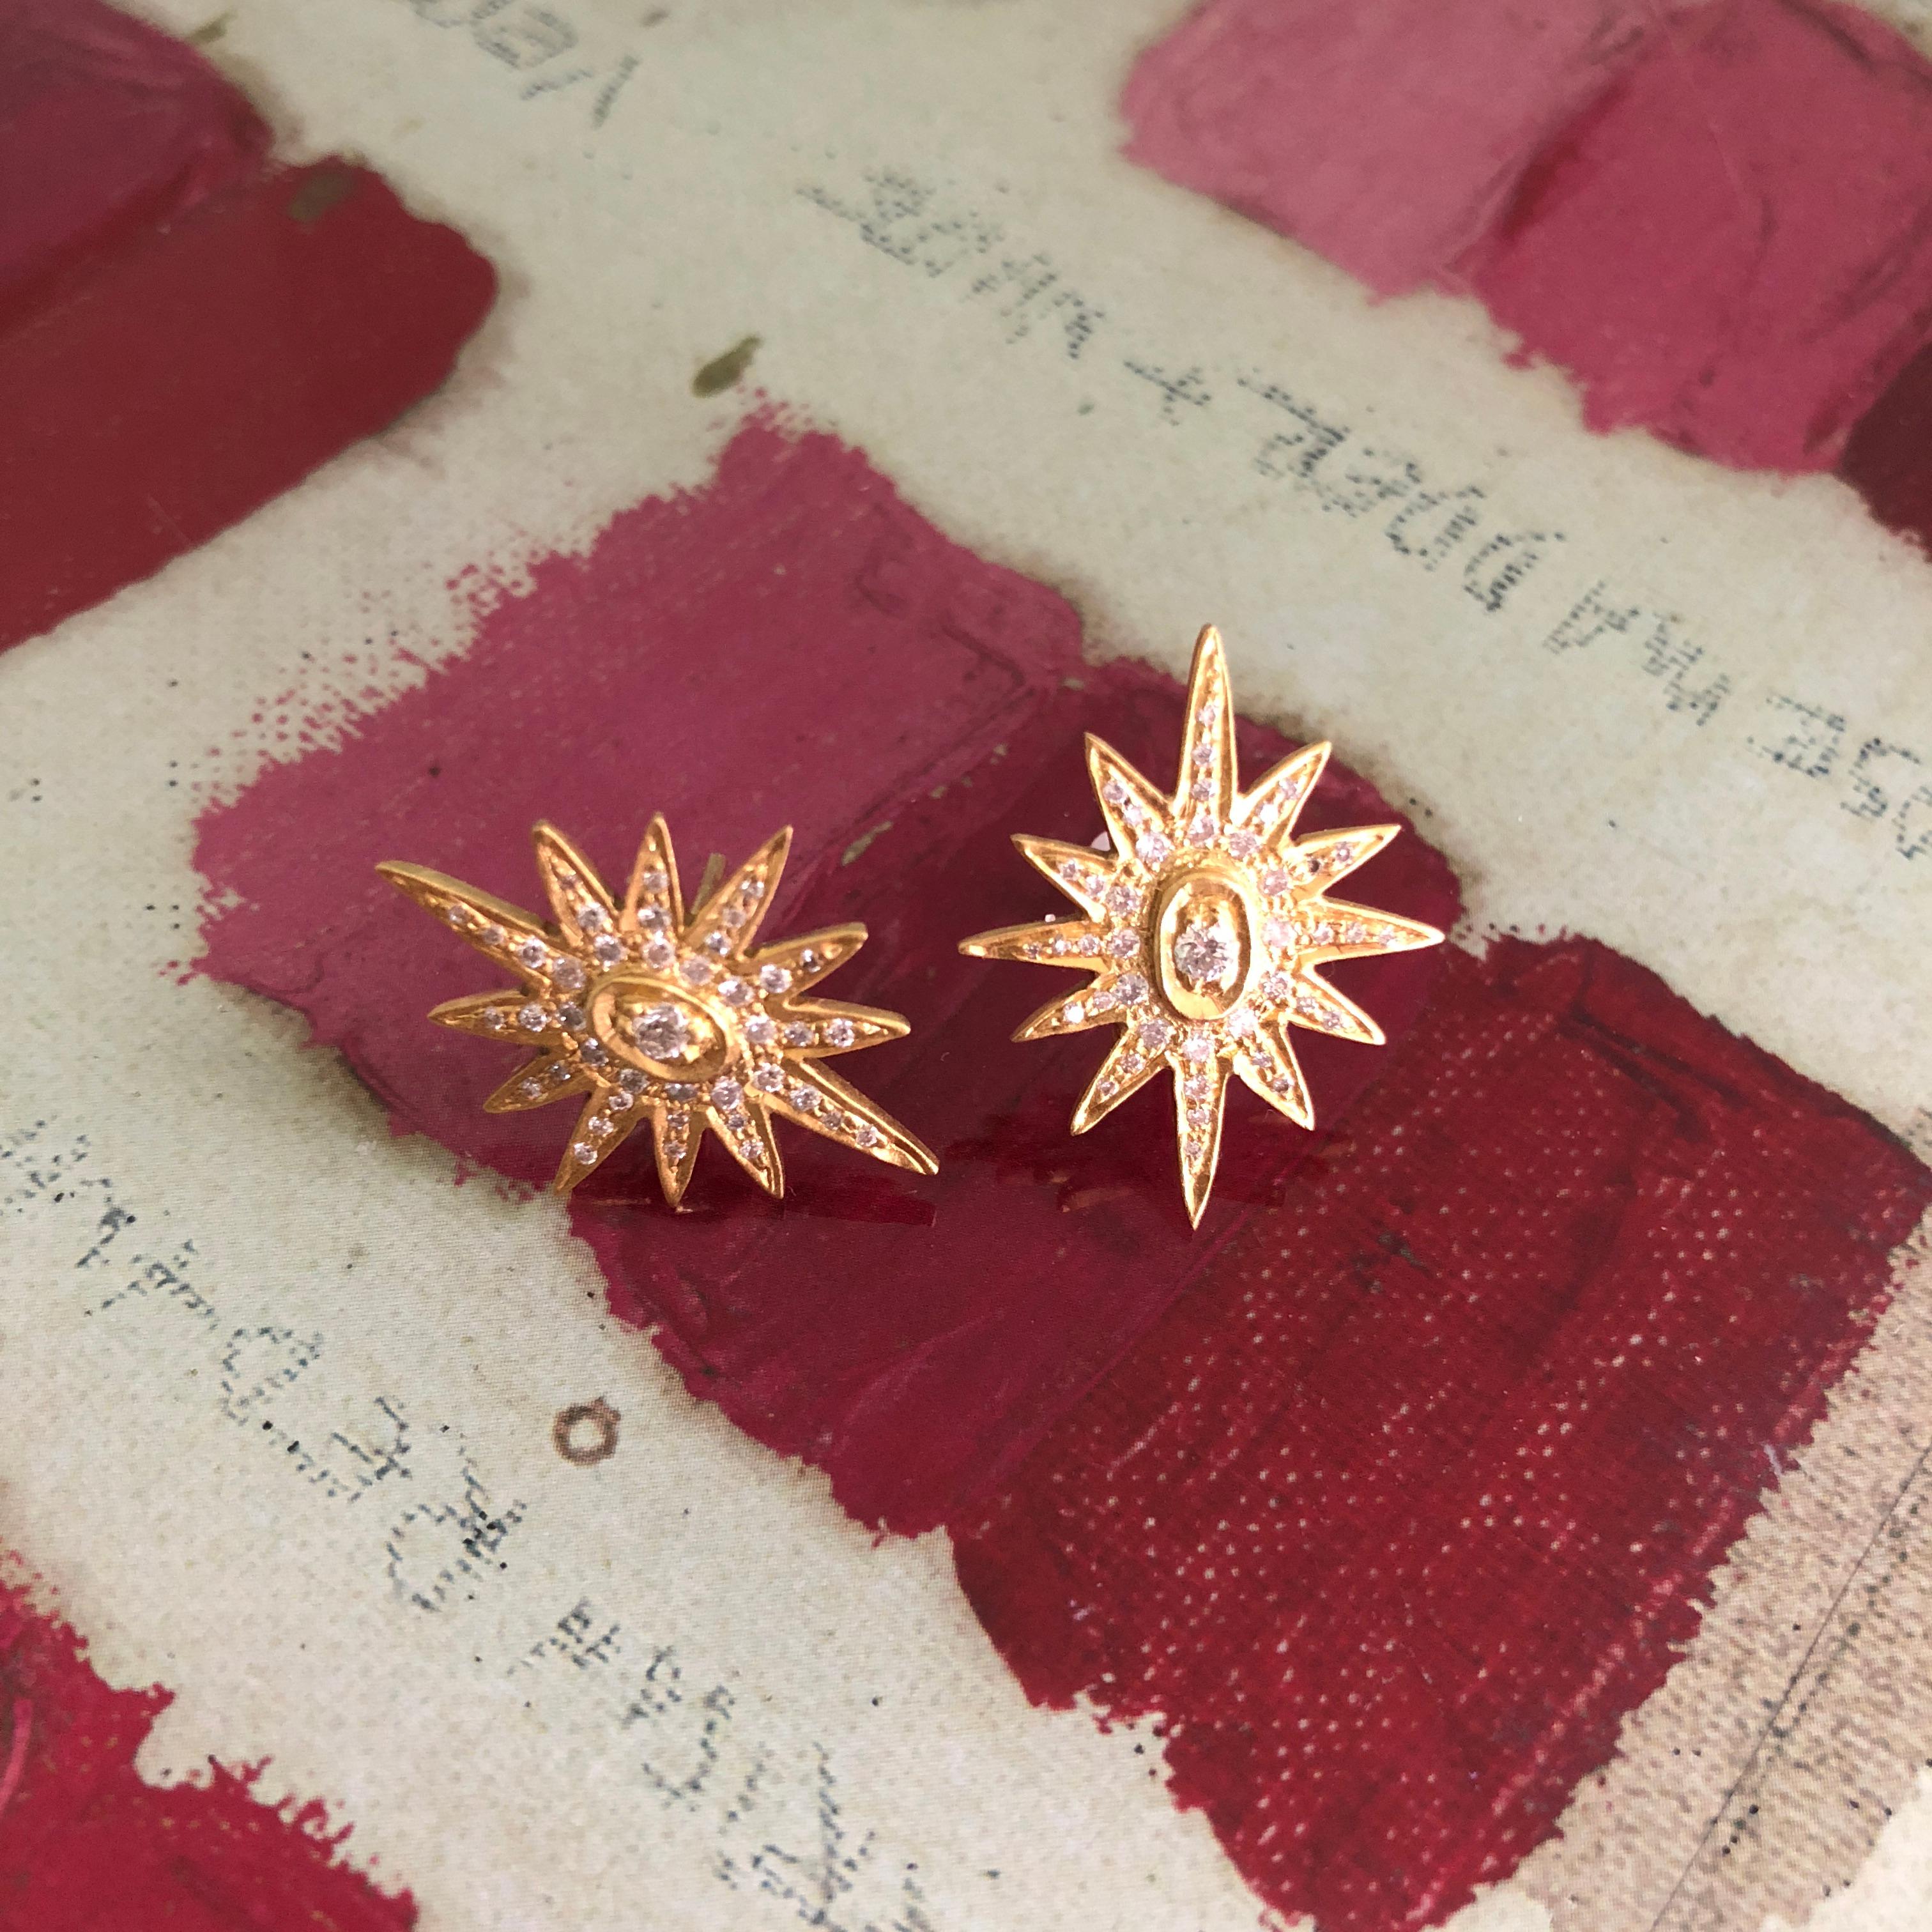 These sparkly Diamond Star Studs will make every outfit complete.  Finished in a matte 18kt Gold finish, they are great for day or evening wear.  Ships directly from designer in beautiful Lauren Harper Collection packaging worthy of gift giving.